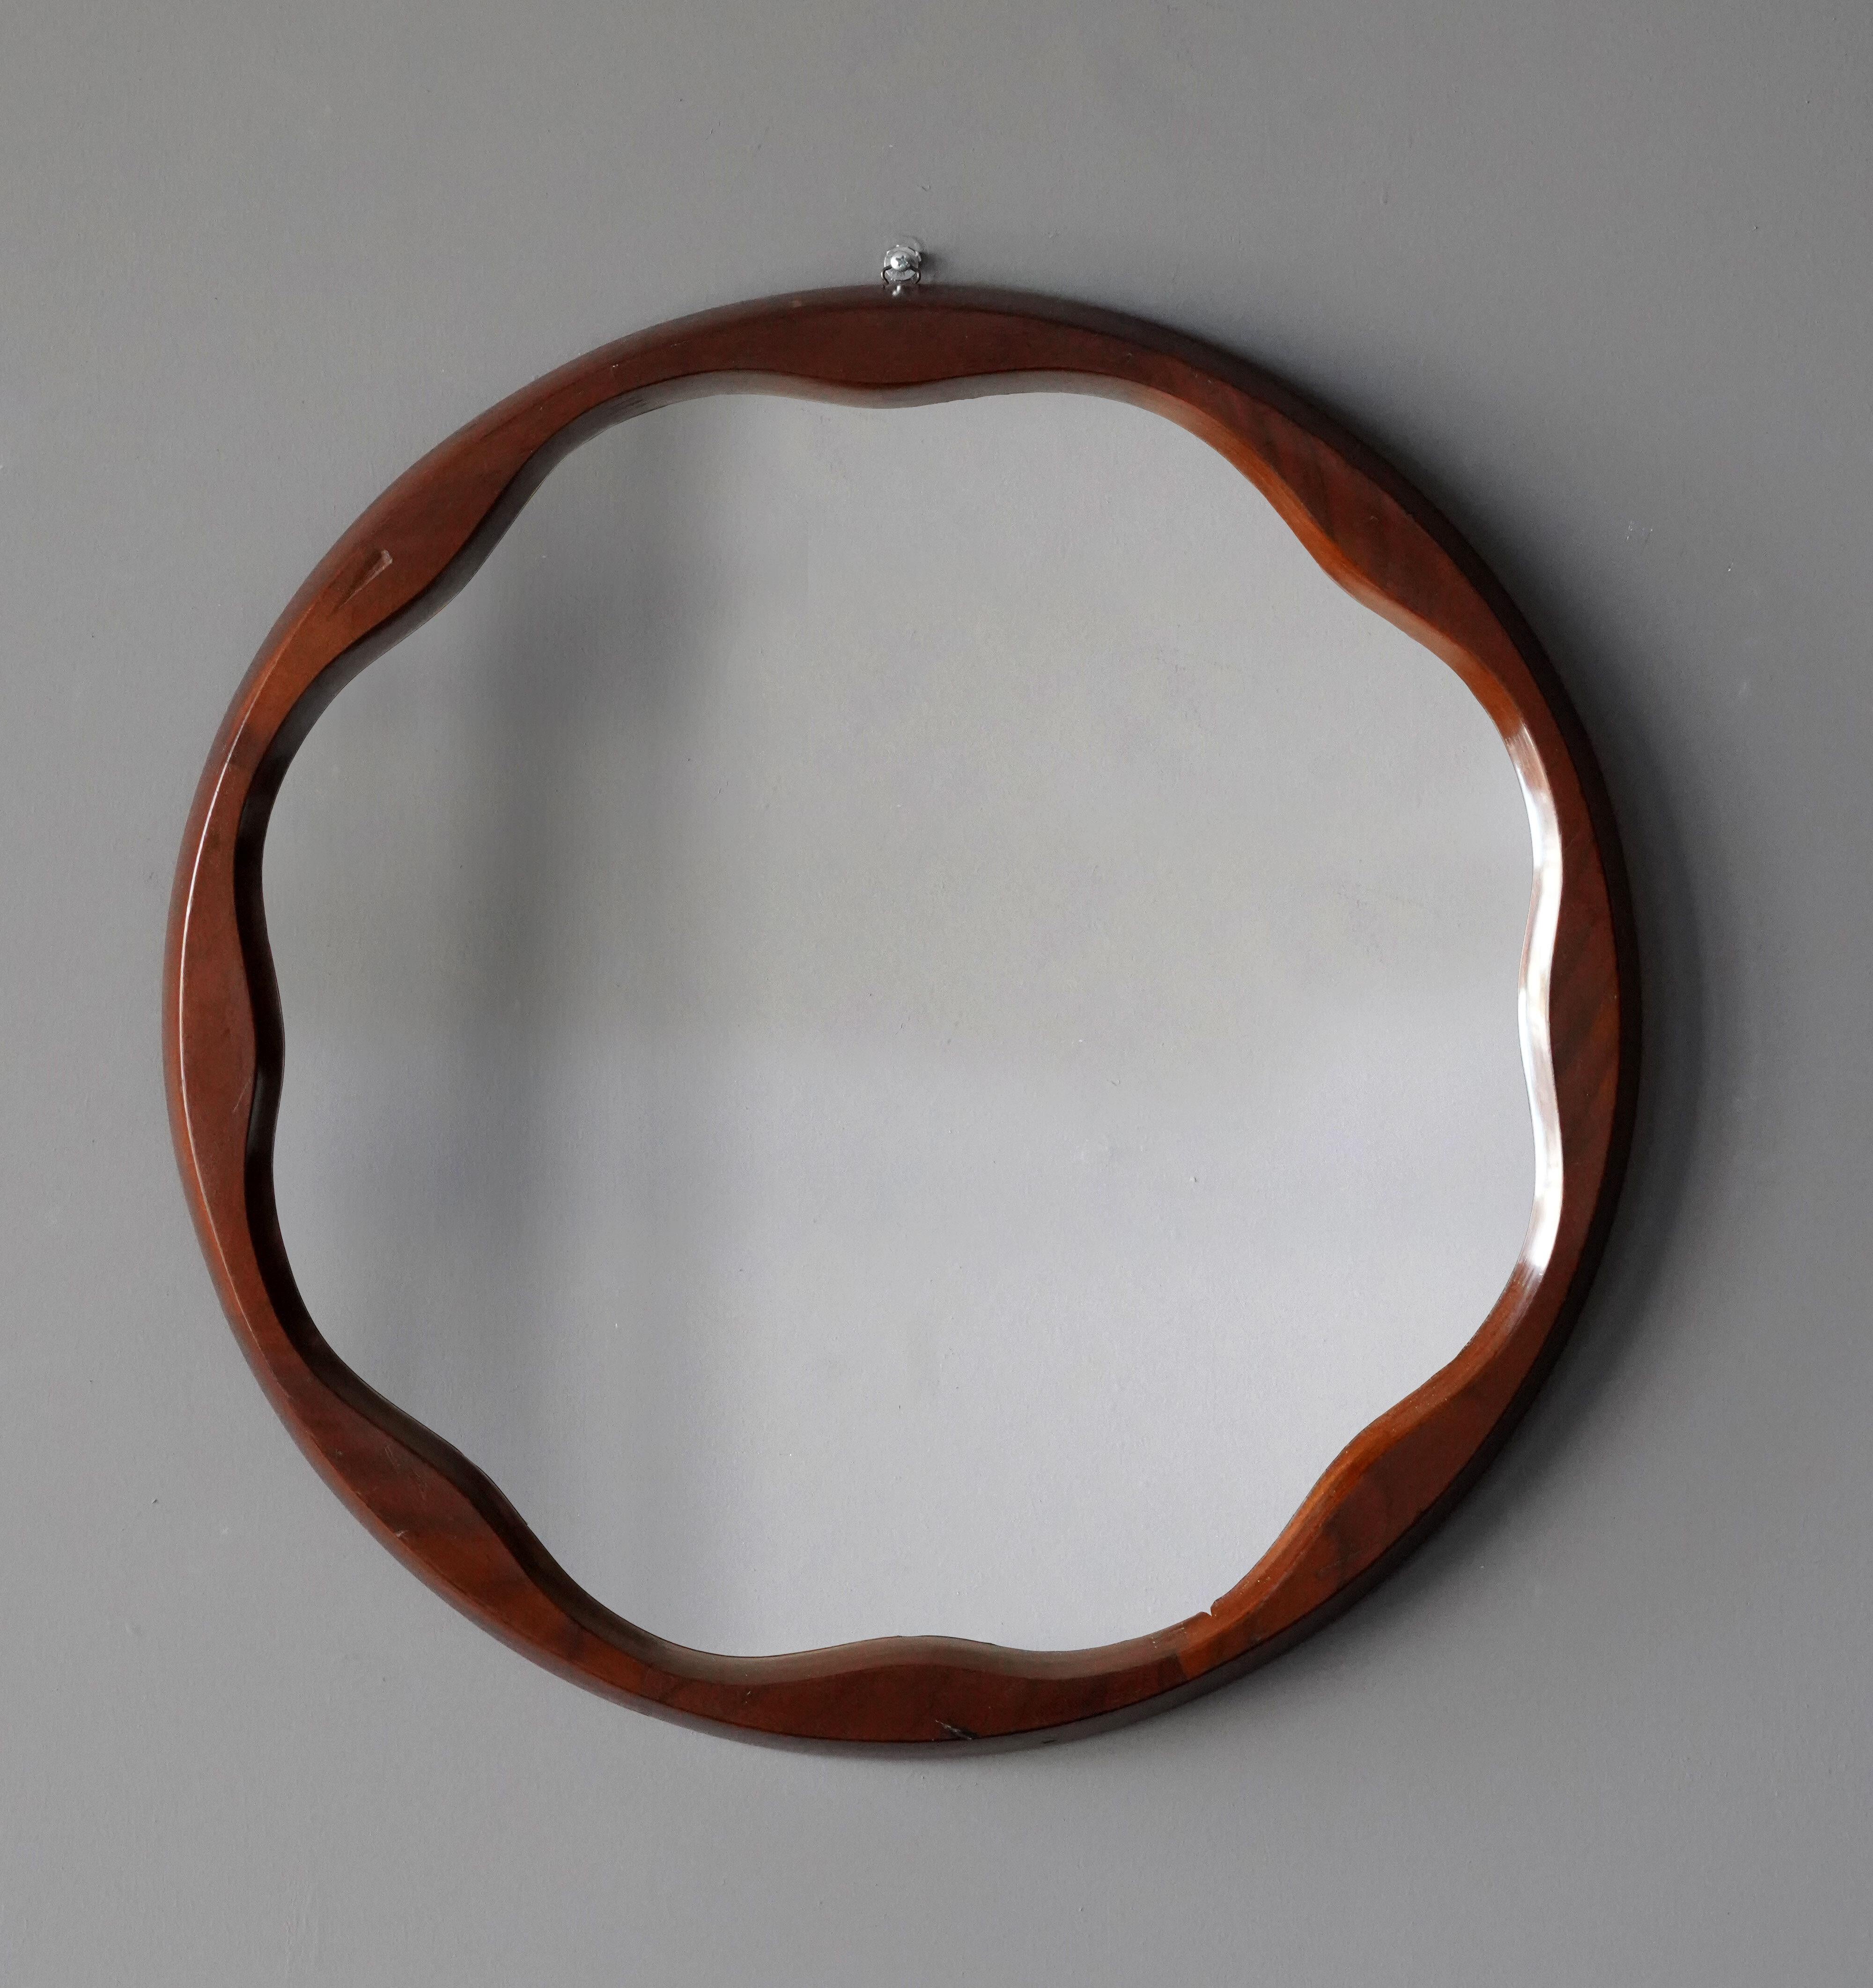 An organic wall mirror, produced in Italy, 1950s. Cut mirror glass is framed in finely sculpted walnut frame.

Other designers of the period include Gio Ponti, Fontana Arte, Paolo Buffa, Franco Albini, and Jean Royere.